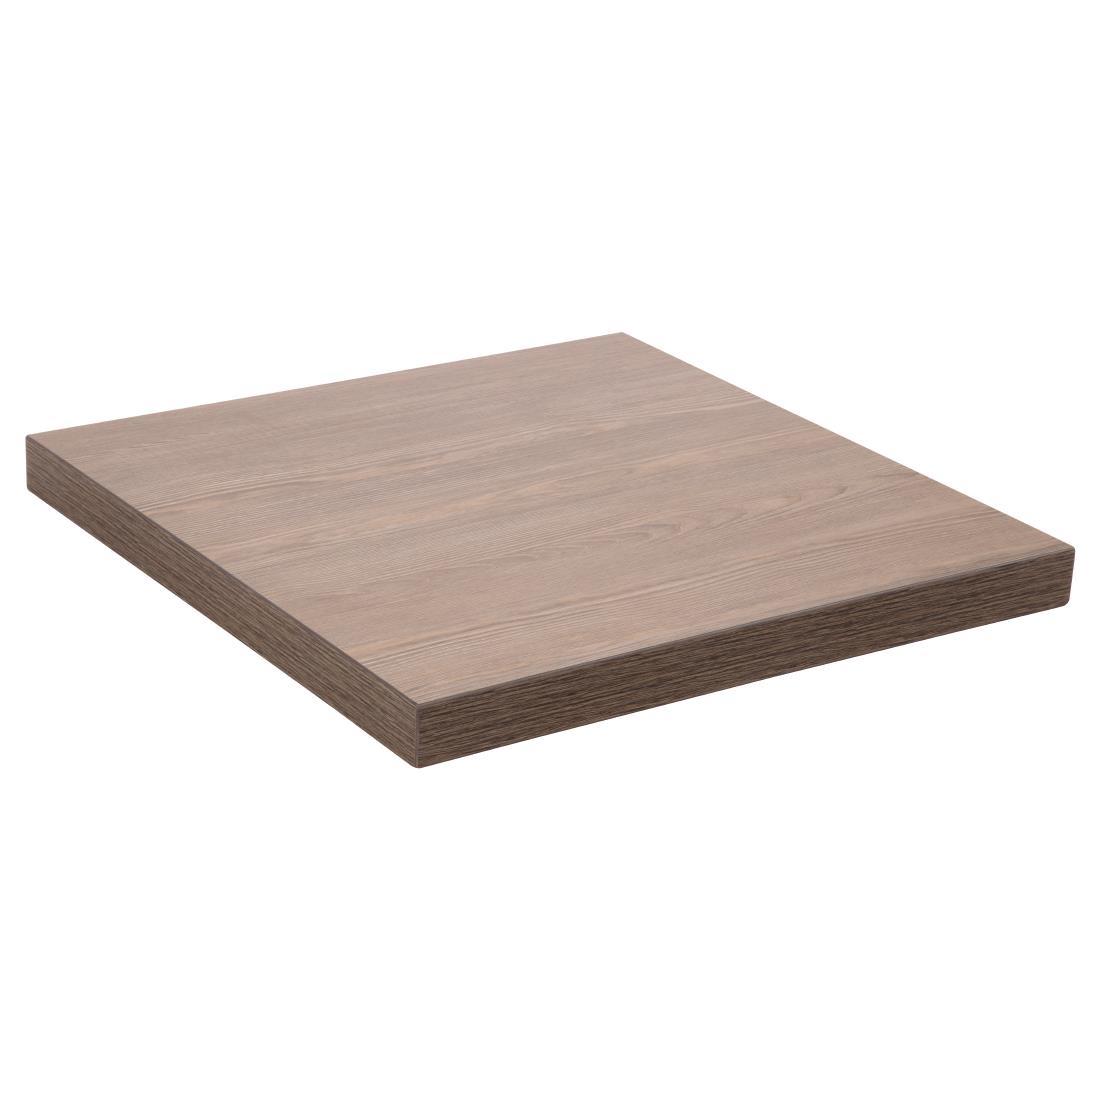 Bolero Pre-drilled Square Table Top Vintage Wood 600mm - GR323  - 2